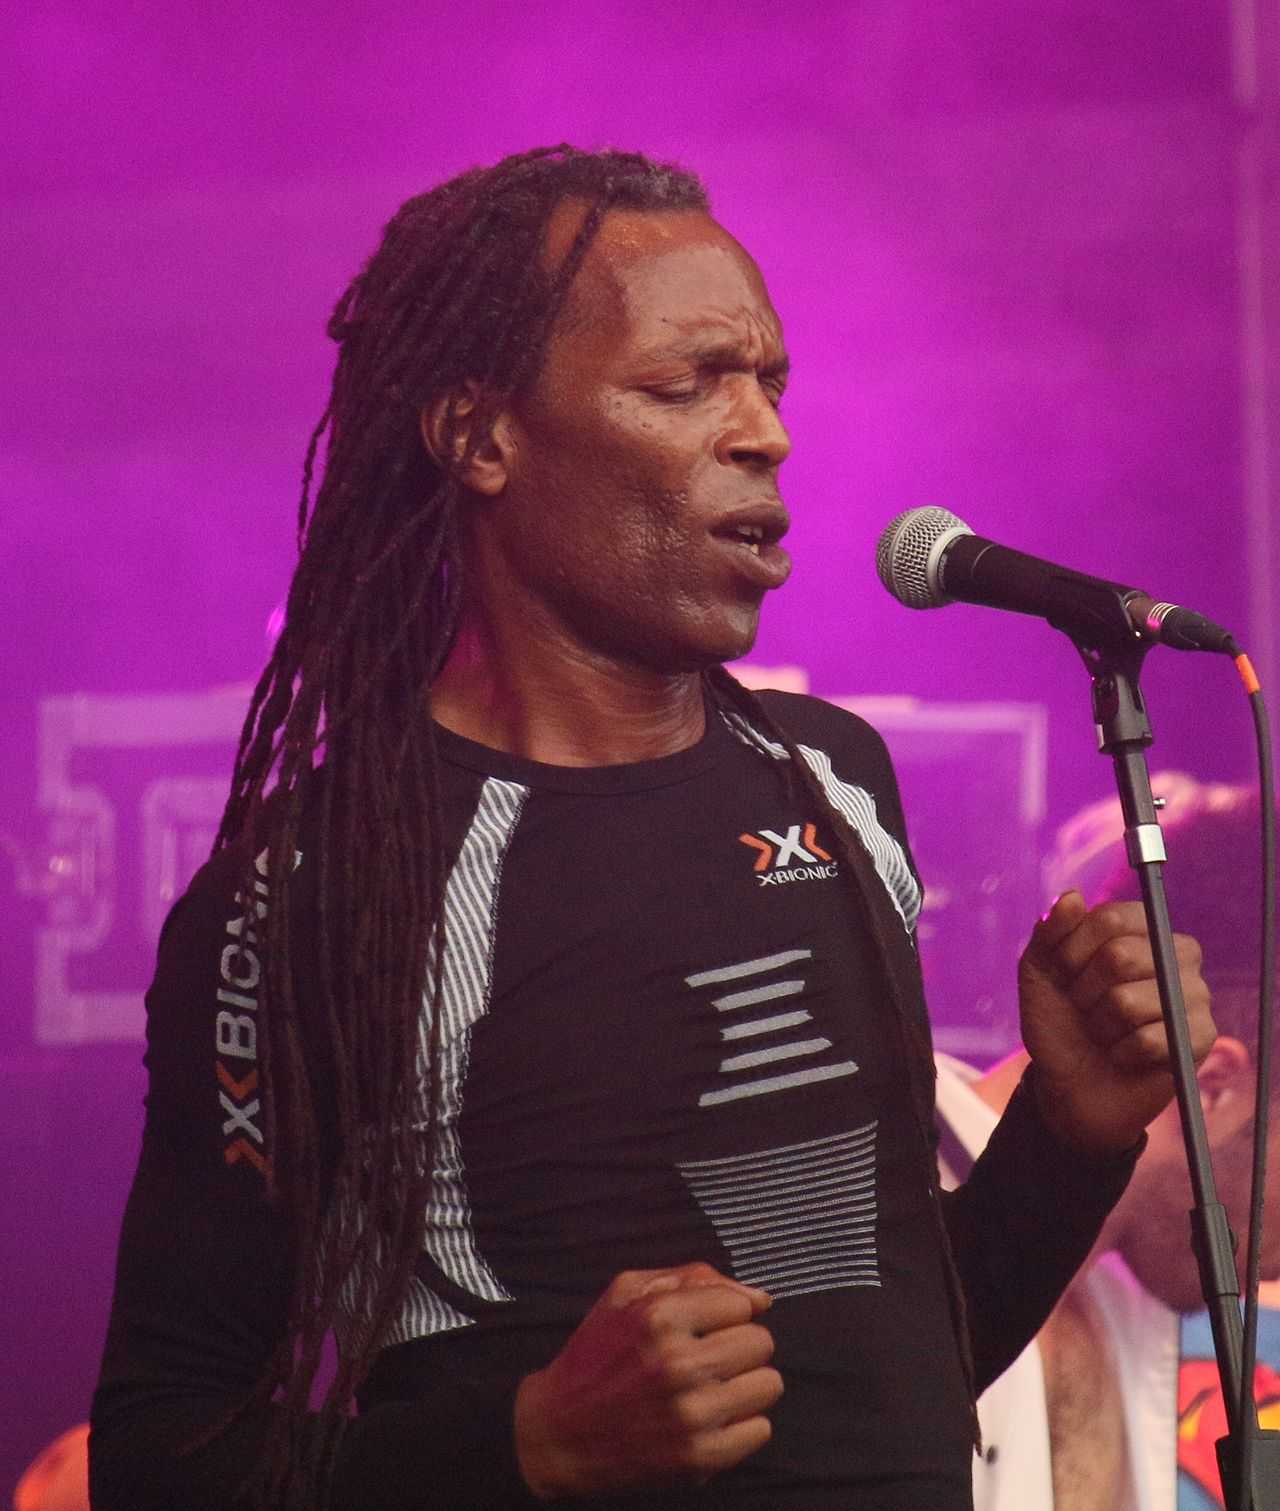 Ranking Roger & The Beat